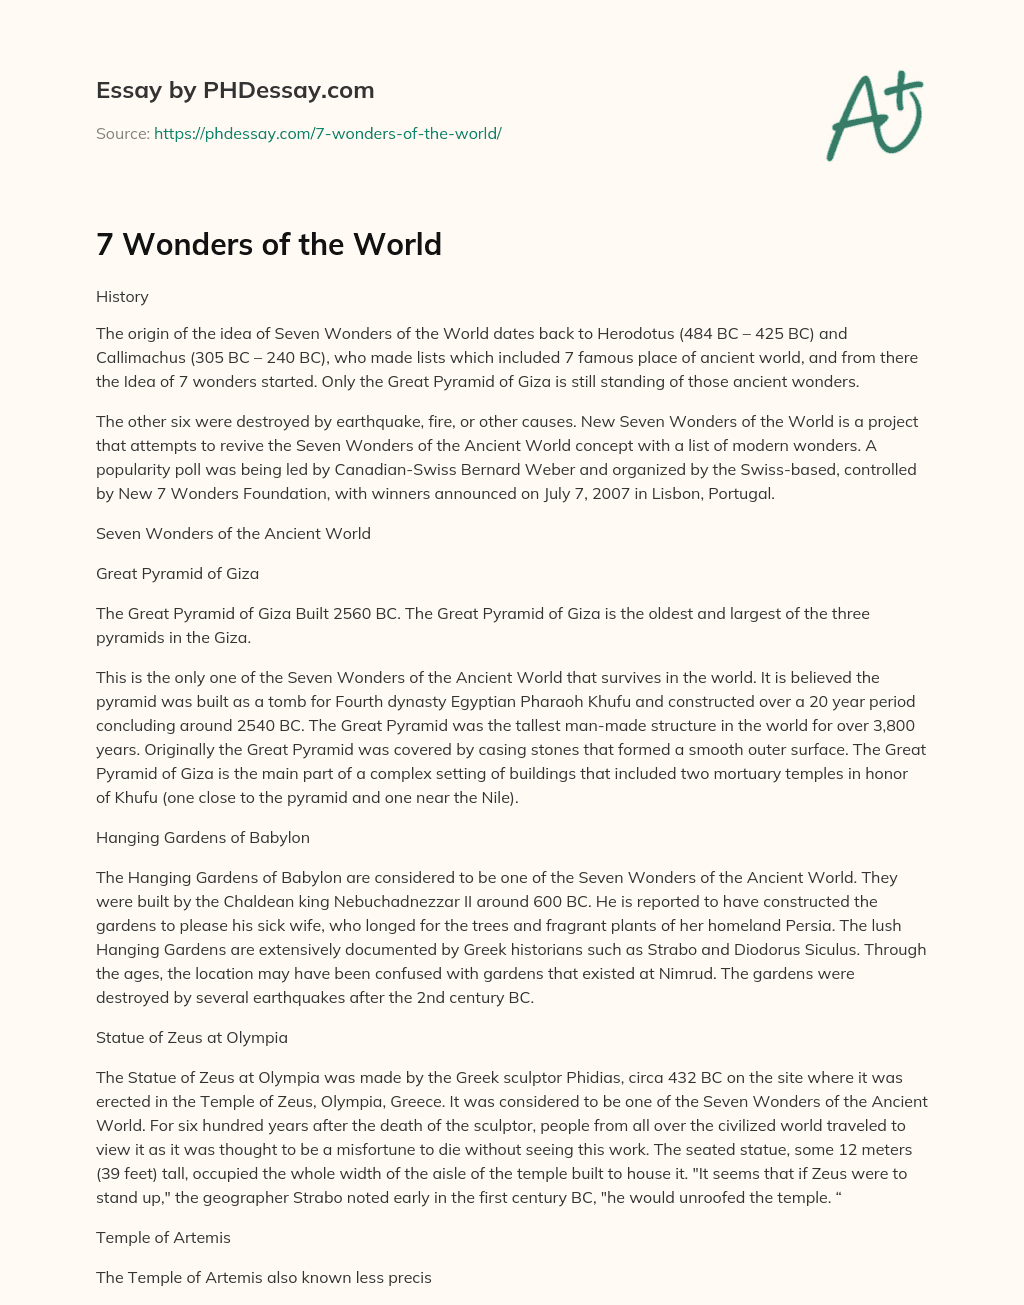 essay writing on seven wonders of the world